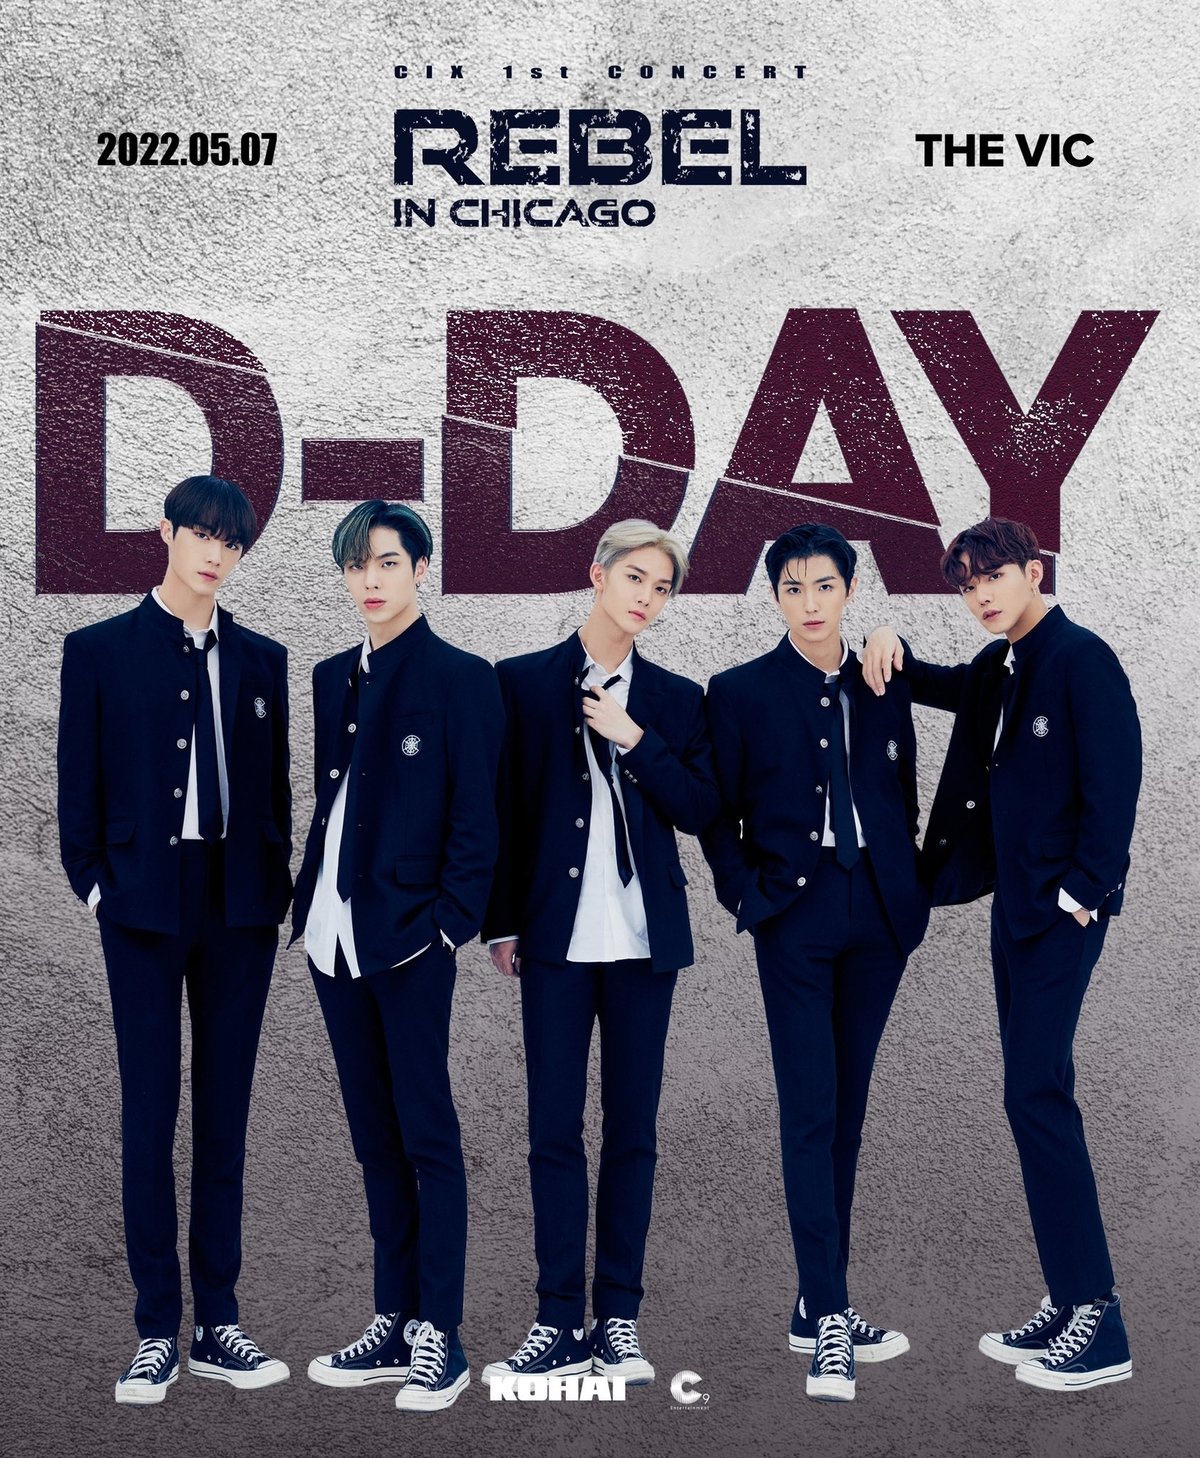 Five members of the K-pop group CIX, who just had a tour, pose for the official tour poster. 